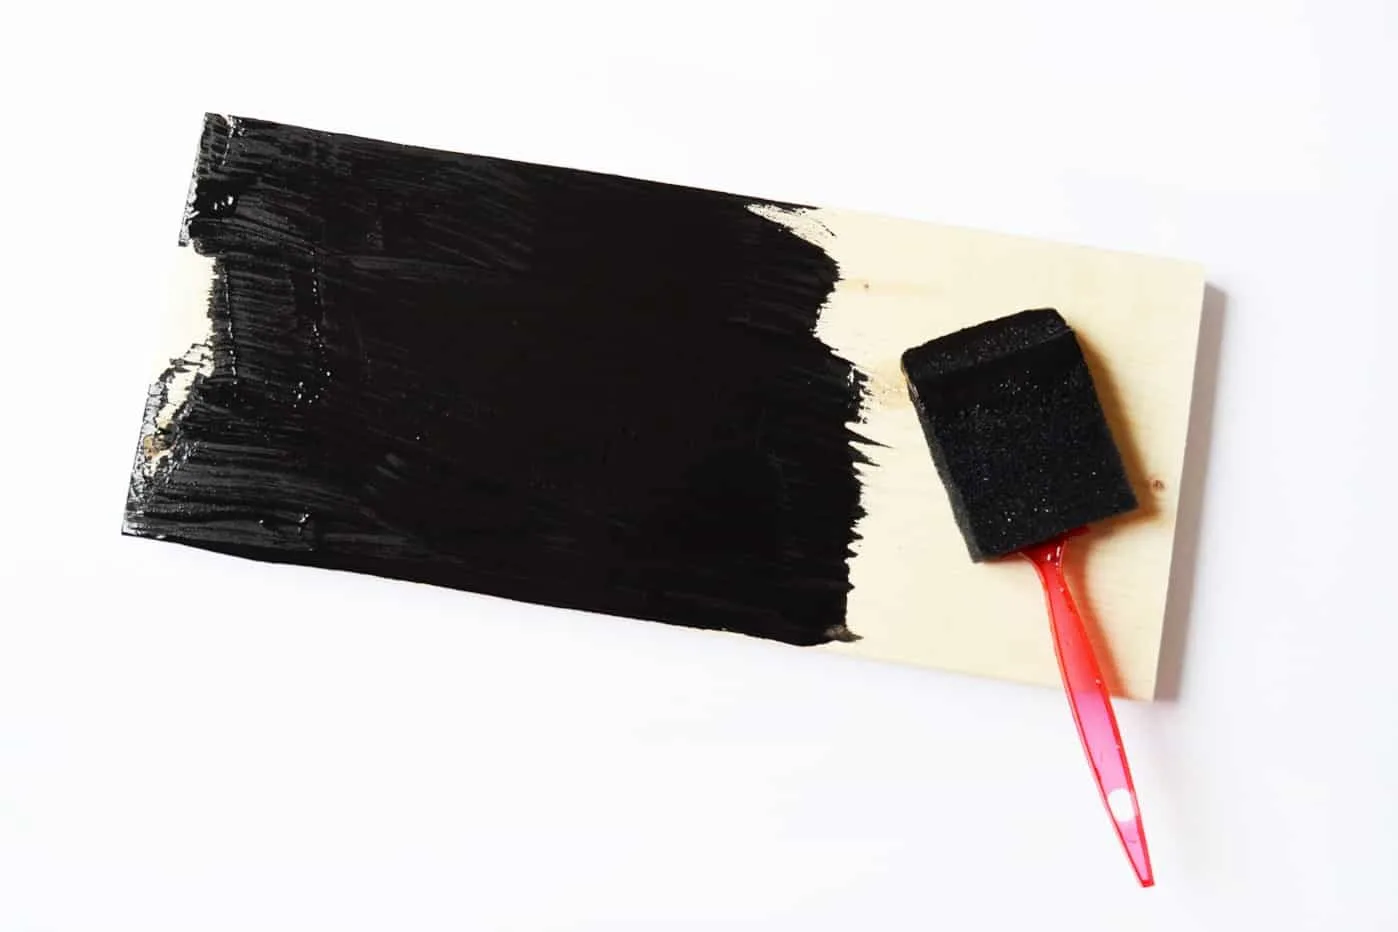 Painting the pine board in black using a foam brush